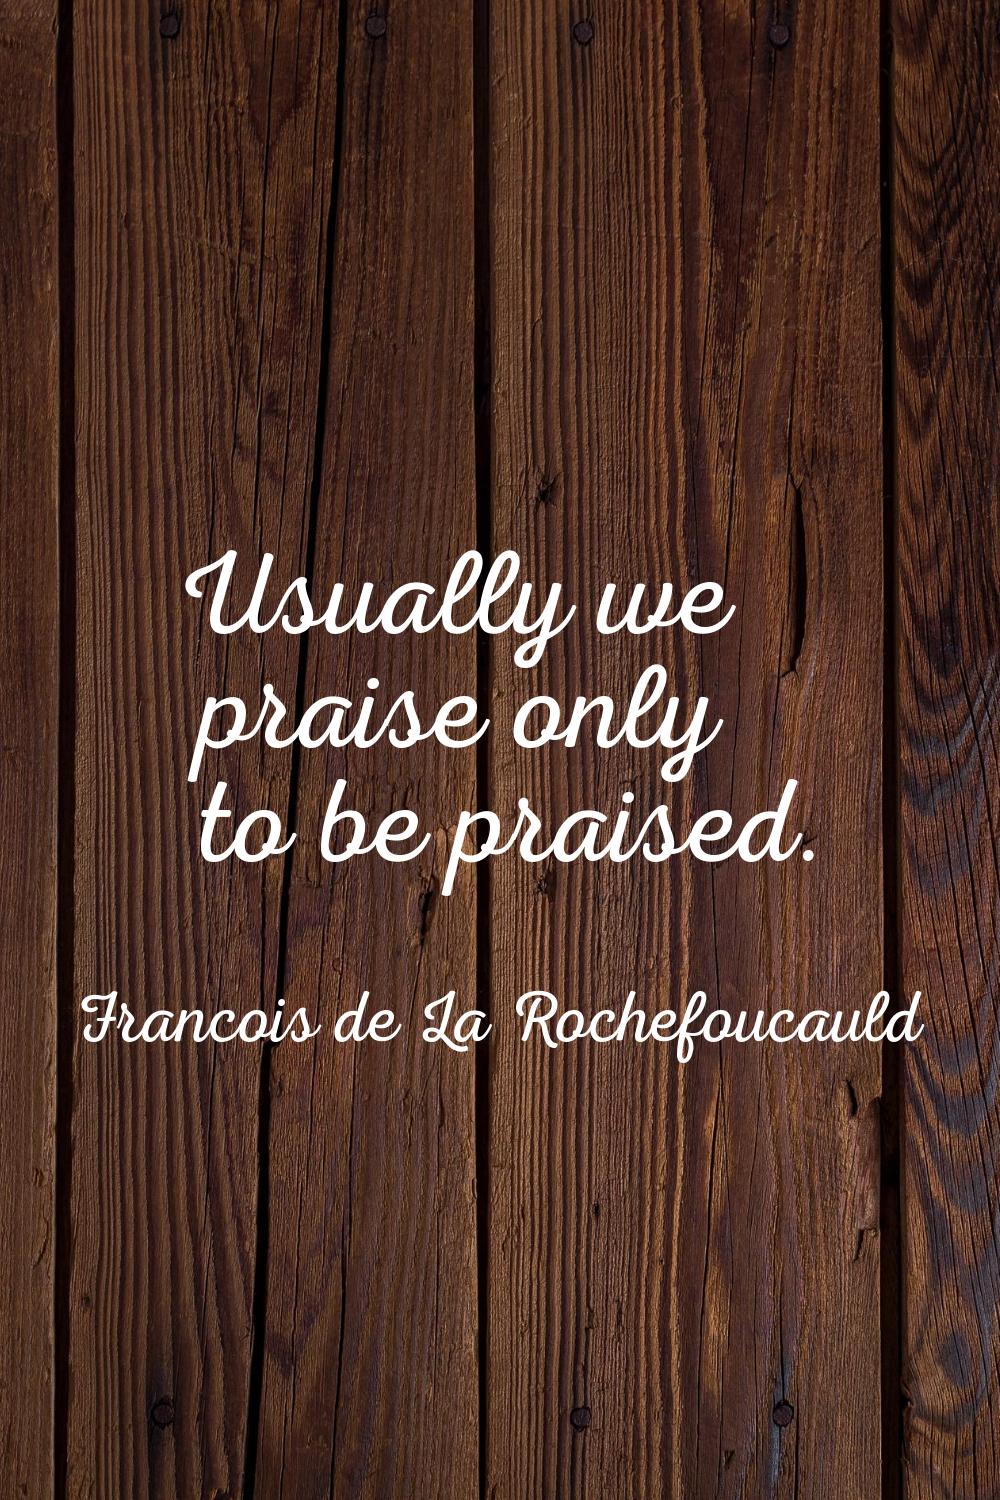 Usually we praise only to be praised.